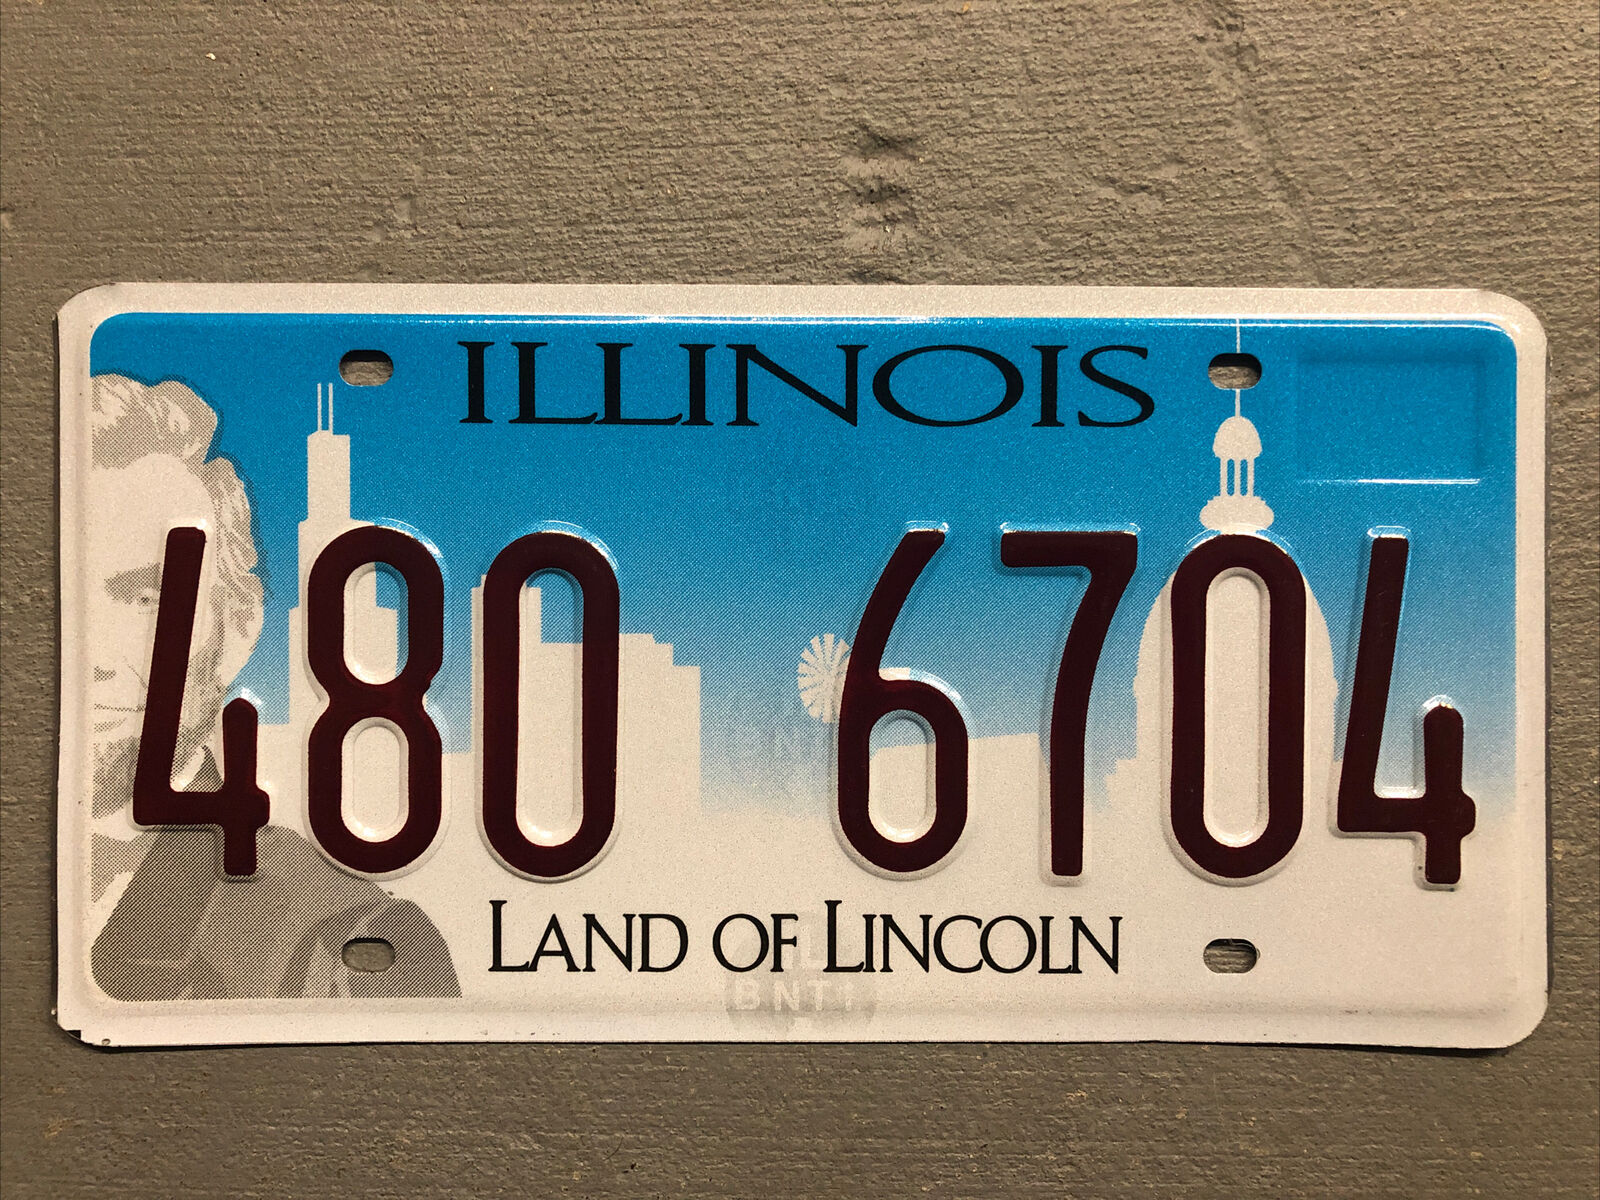 EXPIRED ILLINOIS LICENSE PLATE LAND OF LINCOLN RANDOM LETTERS/NUMBERS NICE